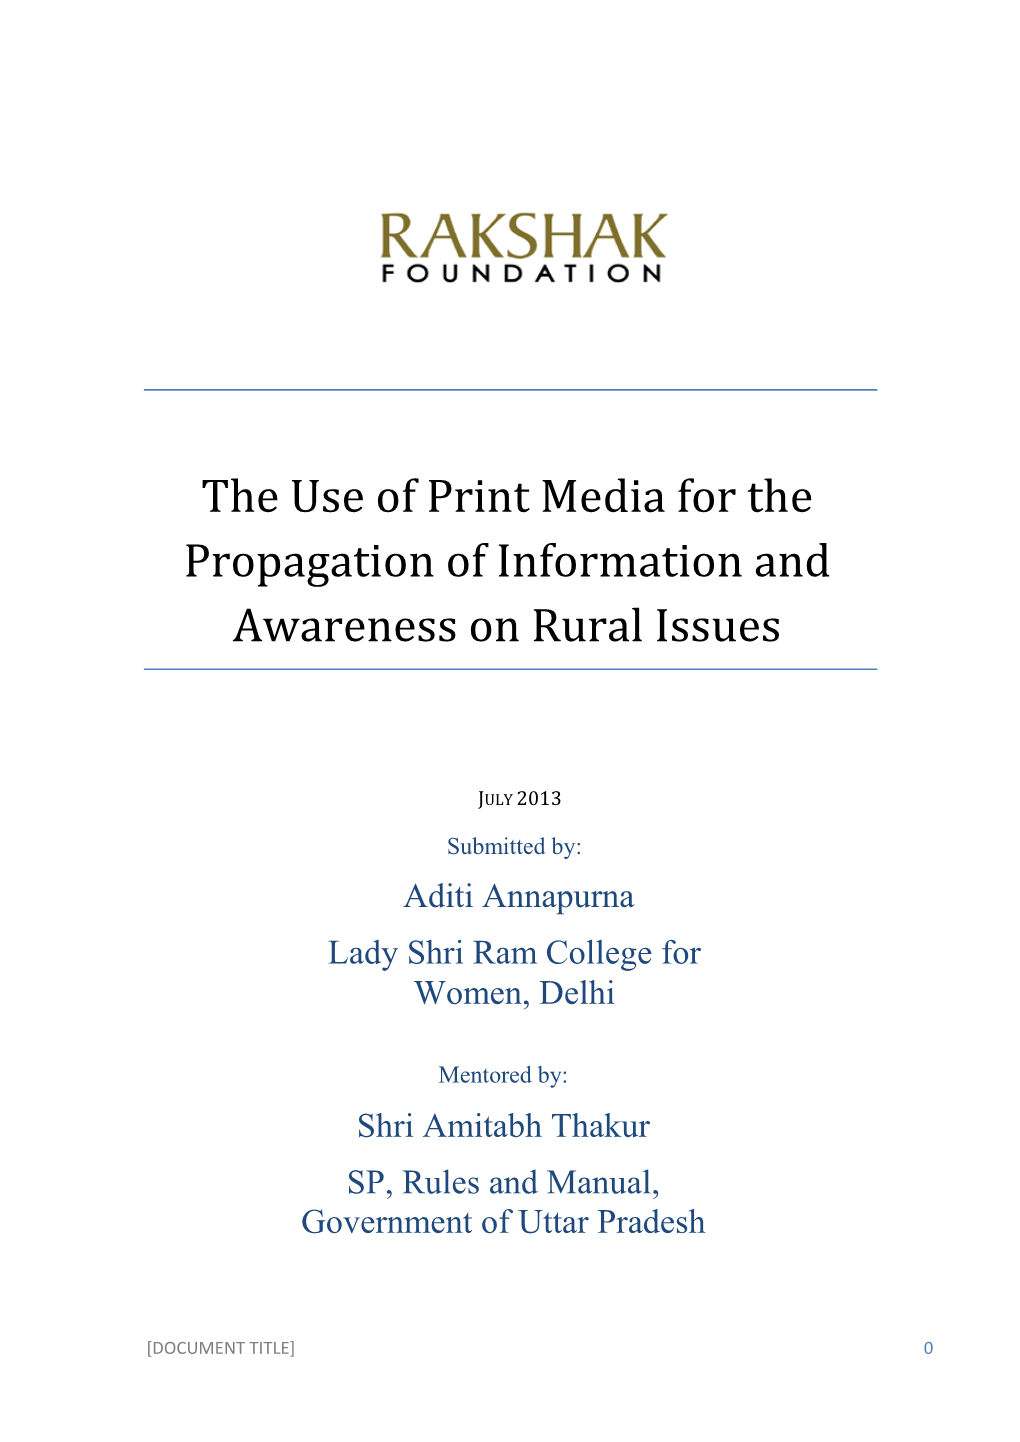 The Use of Print Media for the Propagation of Information and Awareness on Rural Issues